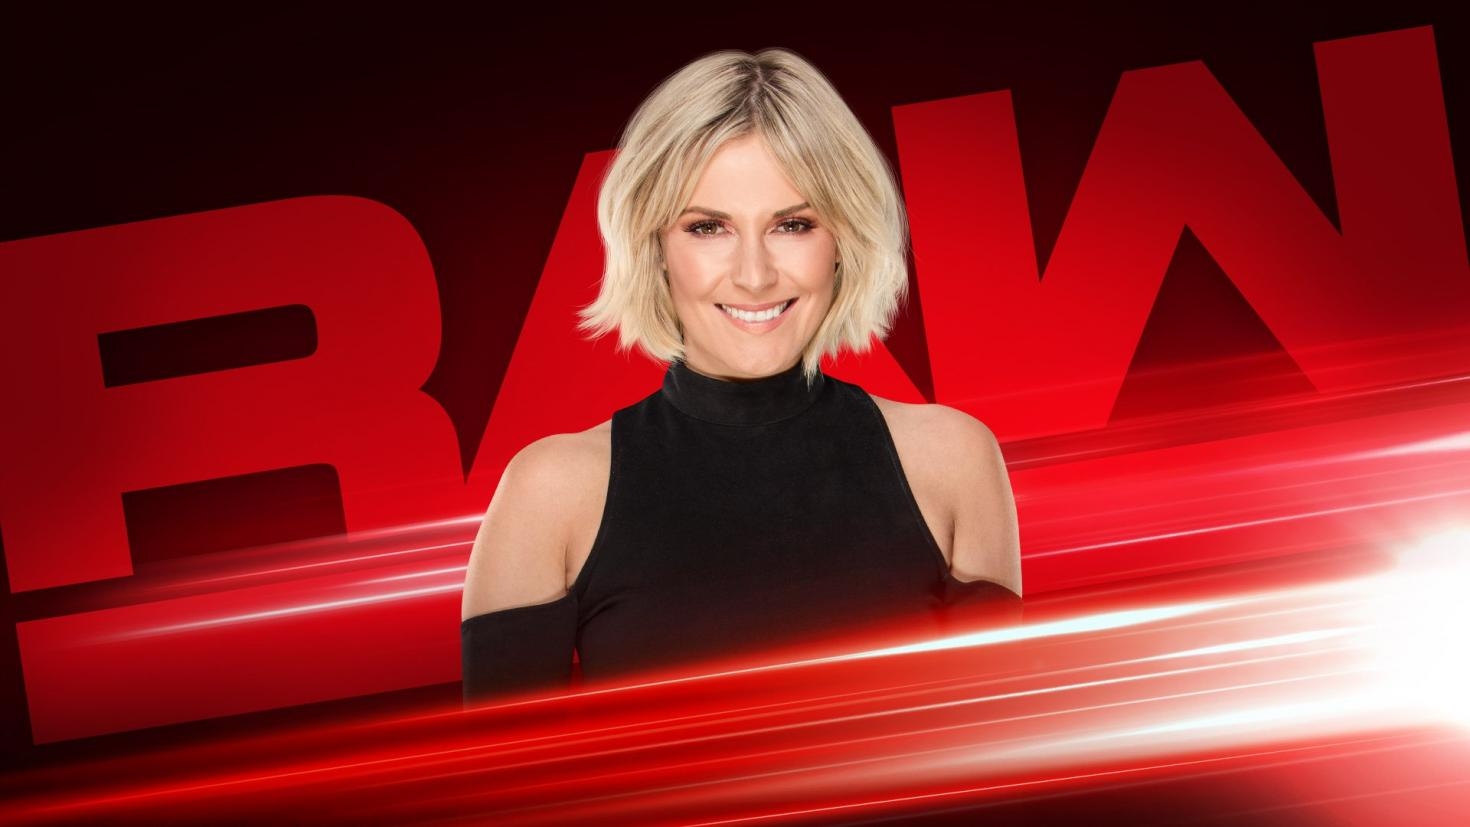 Renee Young joins Raw announce team full-time